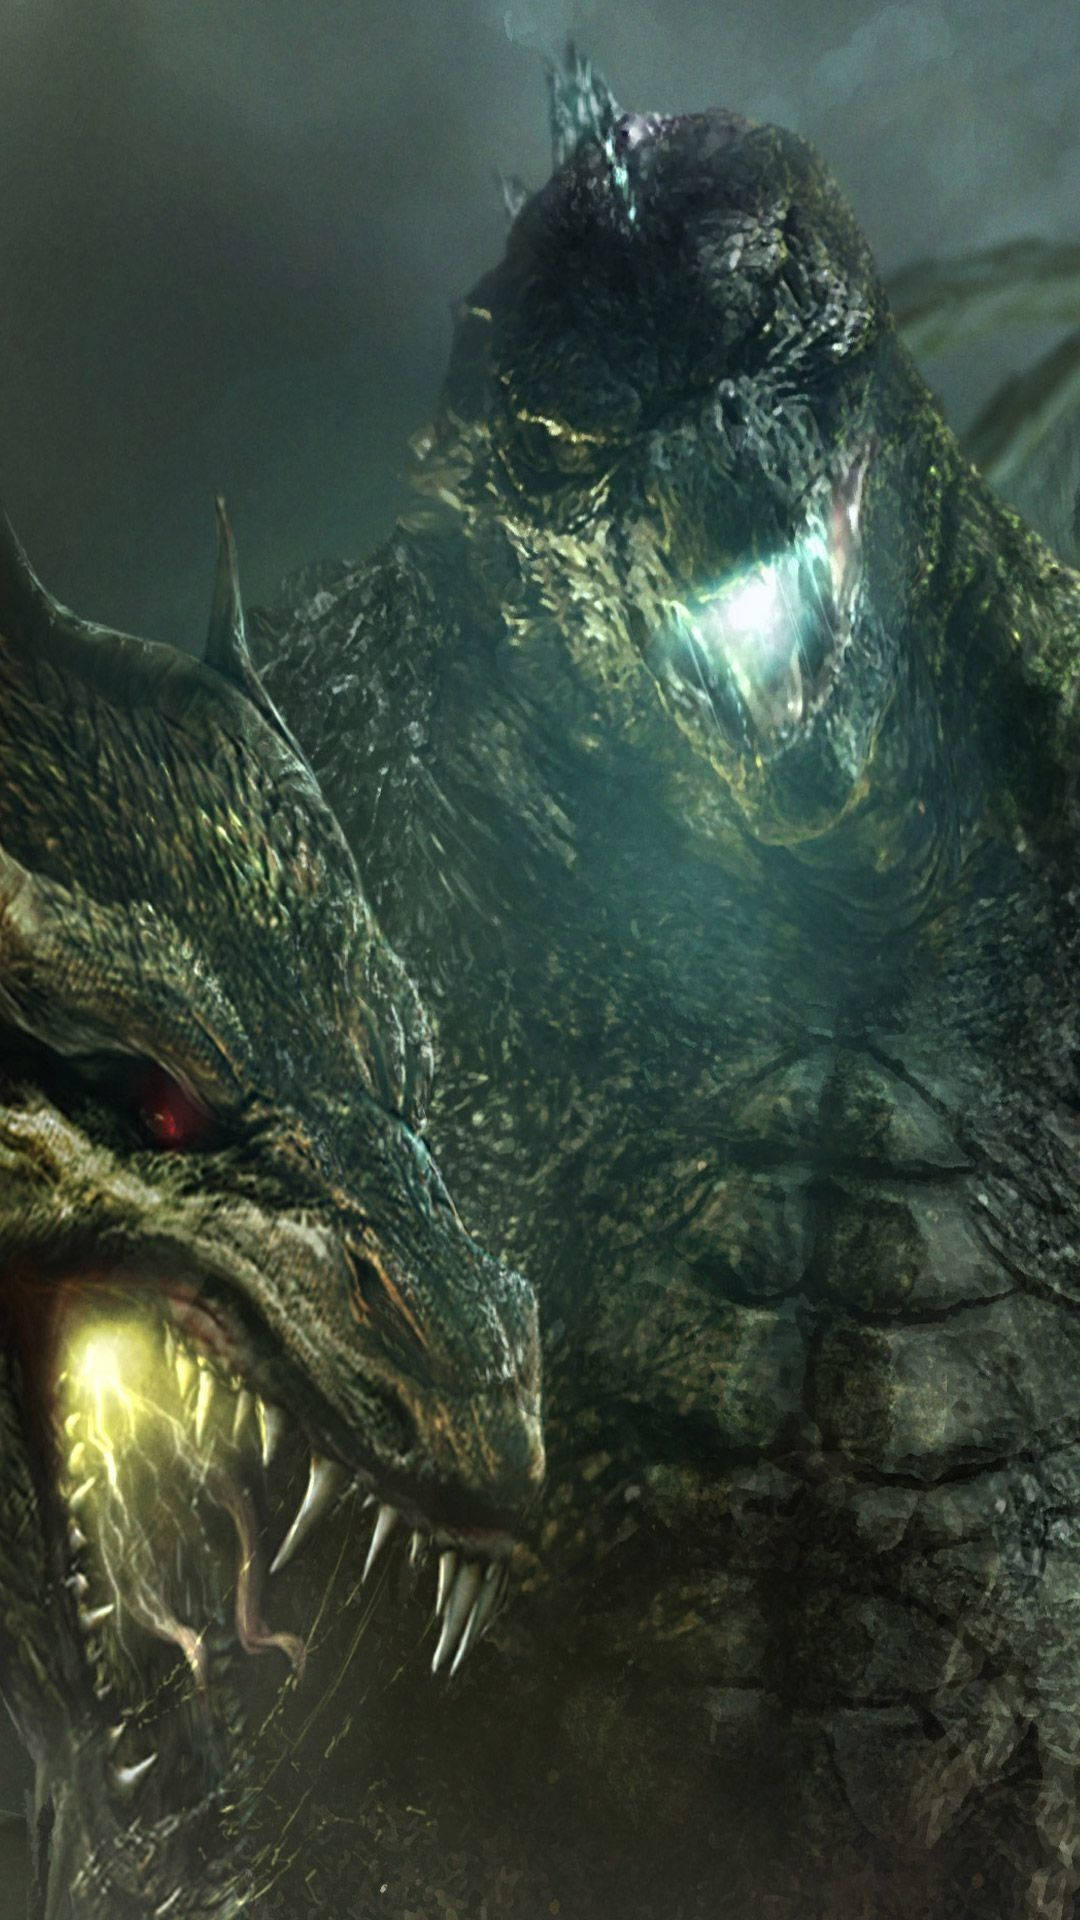 "Godzilla and King Ghidorah Face Off in Godzilla: King of the Monsters" Wallpaper